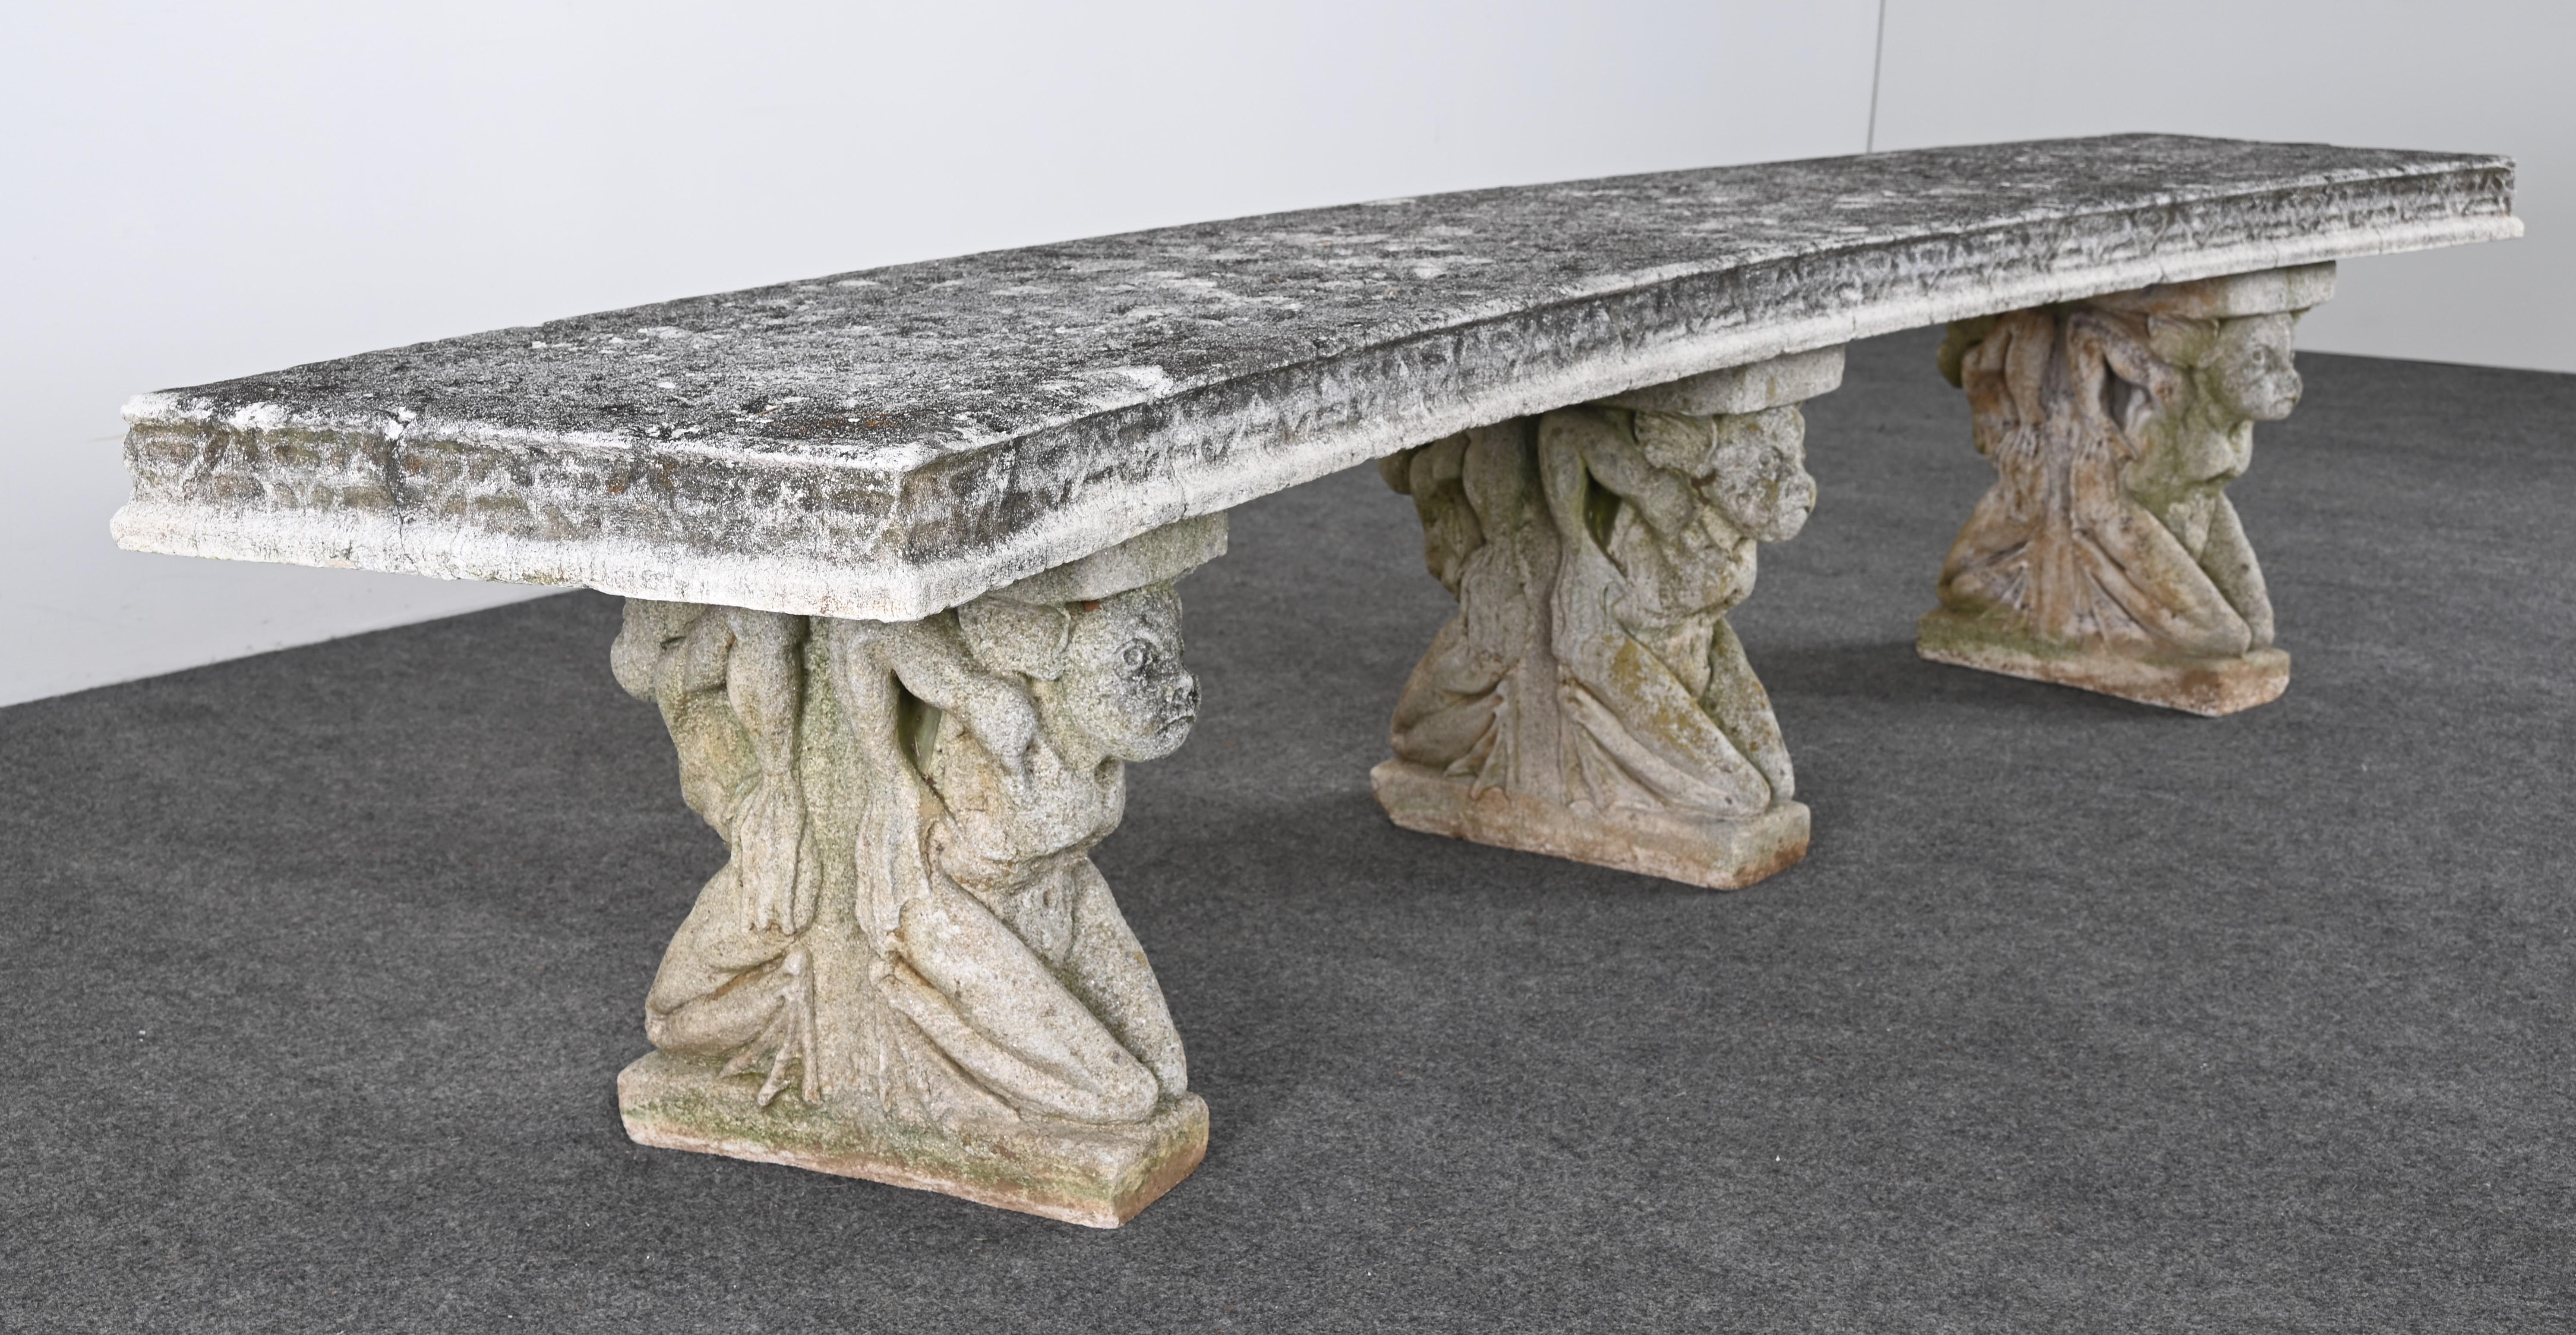 An amazing matched pair of monumental garden benches from the Philadelphia Glencoe Mansion Estate. If you want a piece of history from the Main Line Bryn Mawr Philadelphia estate look no further. This pair of benches are decorated with allegorical